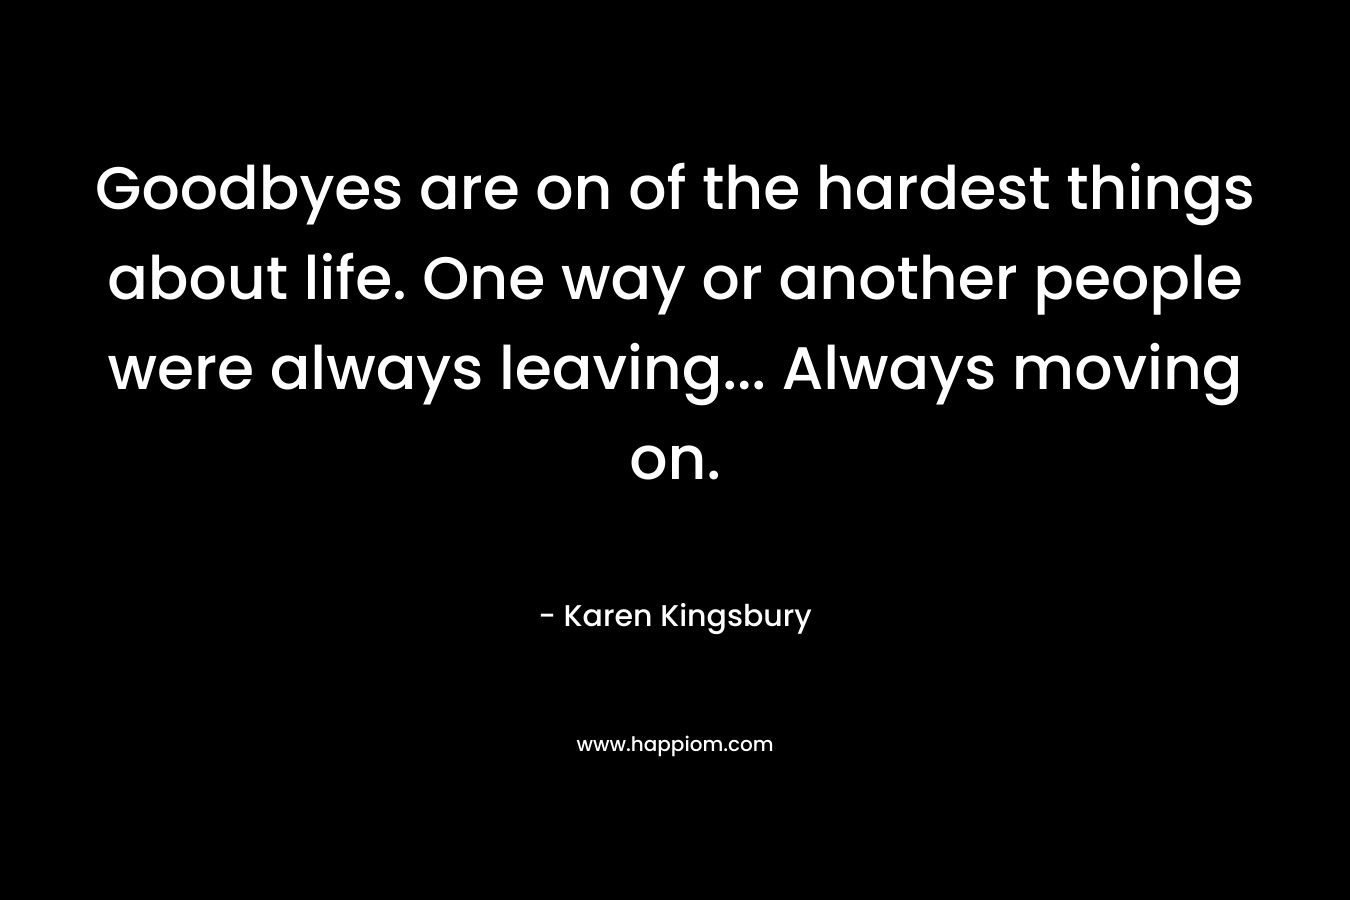 Goodbyes are on of the hardest things about life. One way or another people were always leaving... Always moving on.